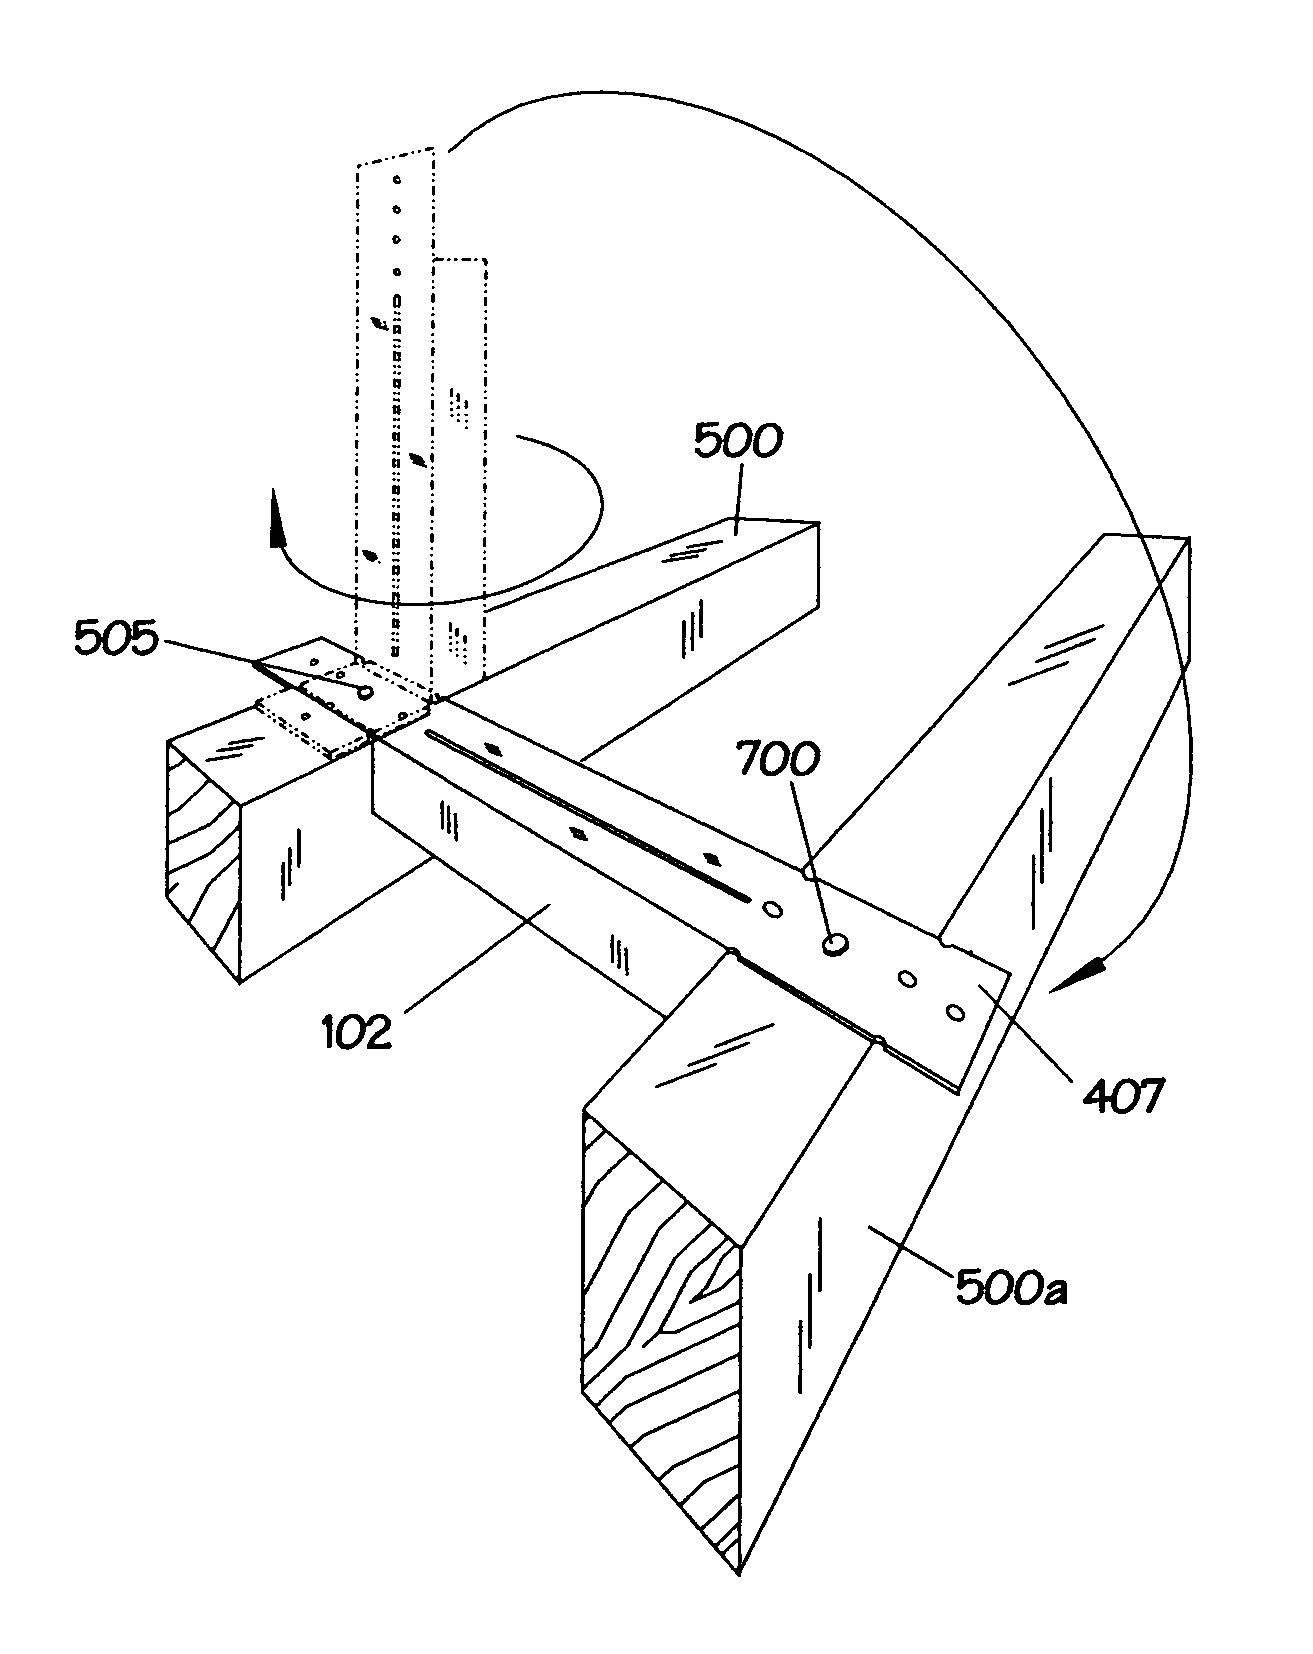 Device and method for spacing and bracing framing components